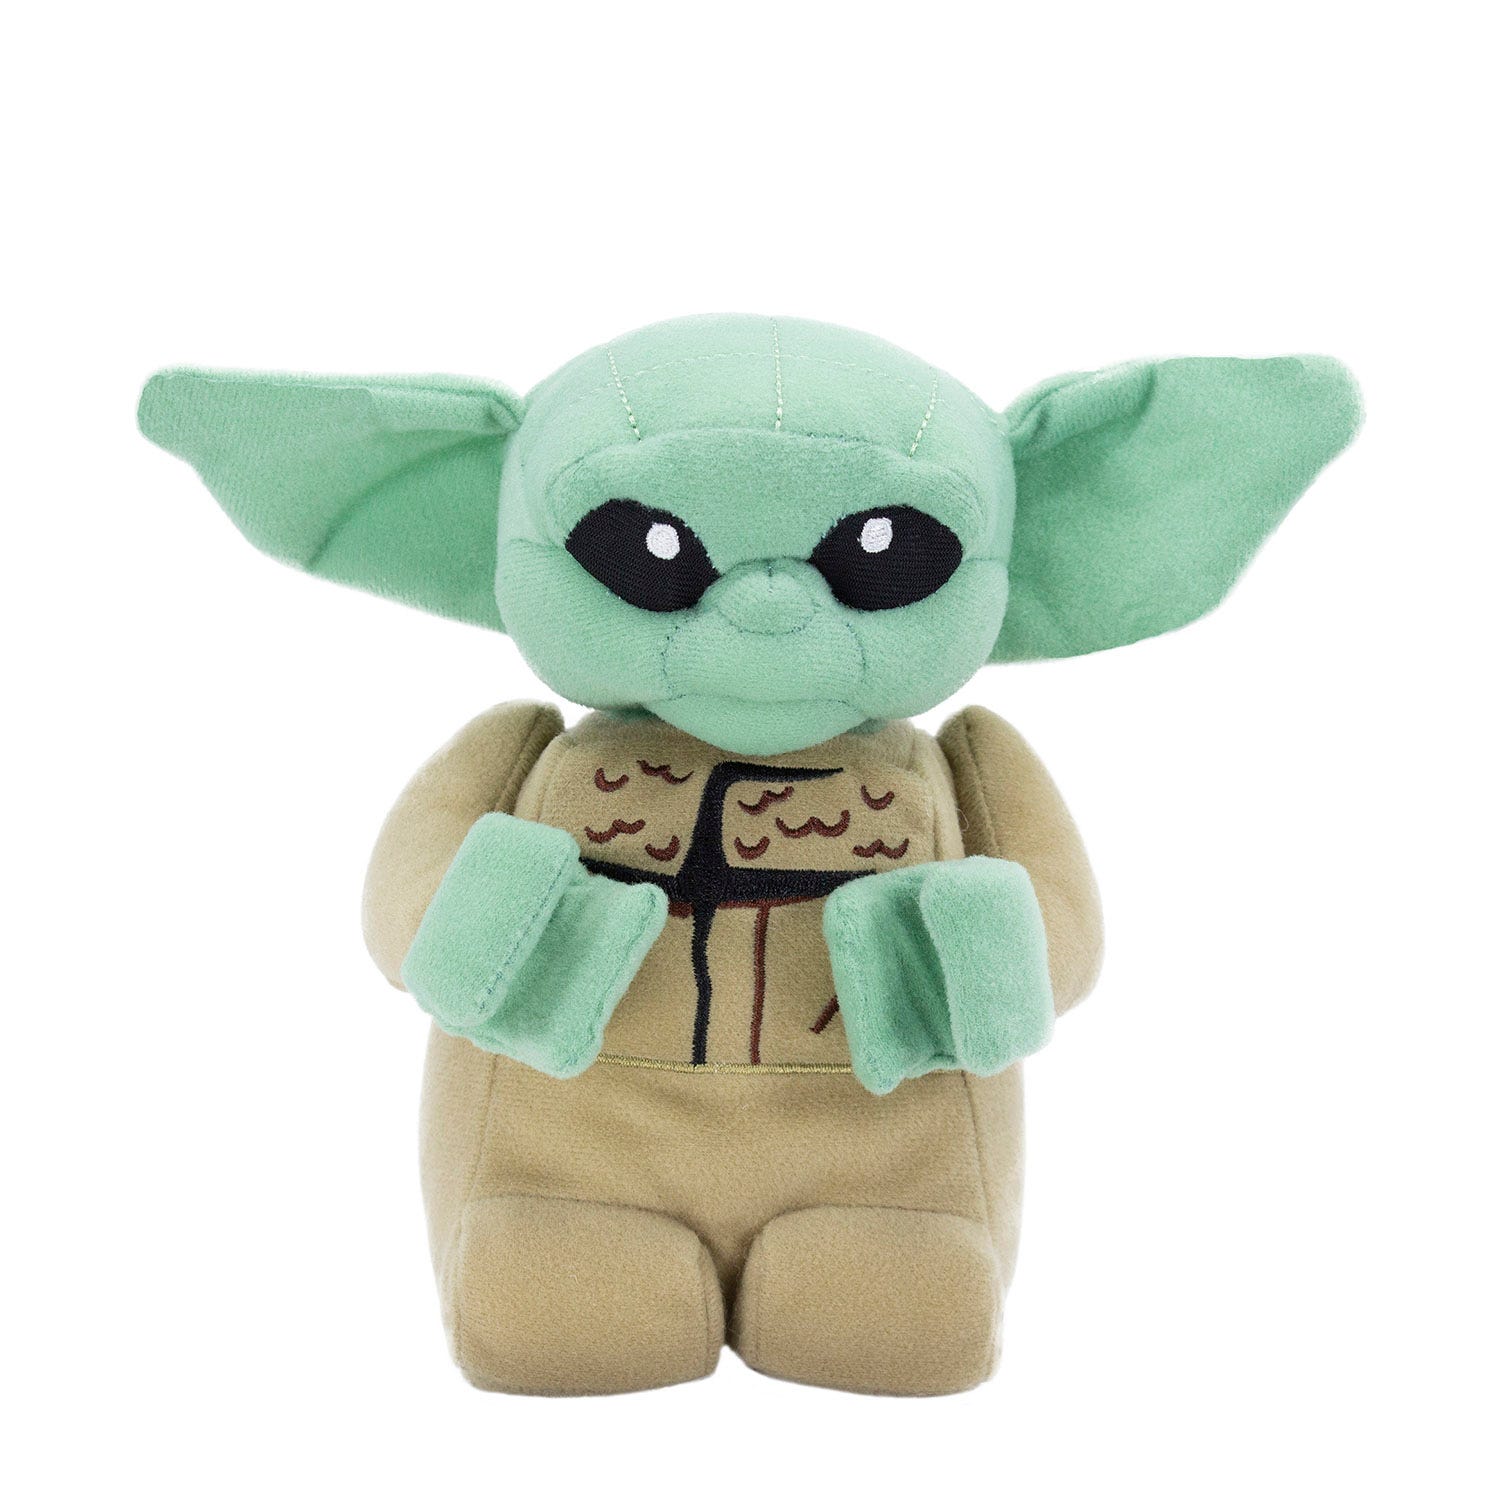 The Child Plush 5006622 Star Wars™ Buy Online At The Official Lego